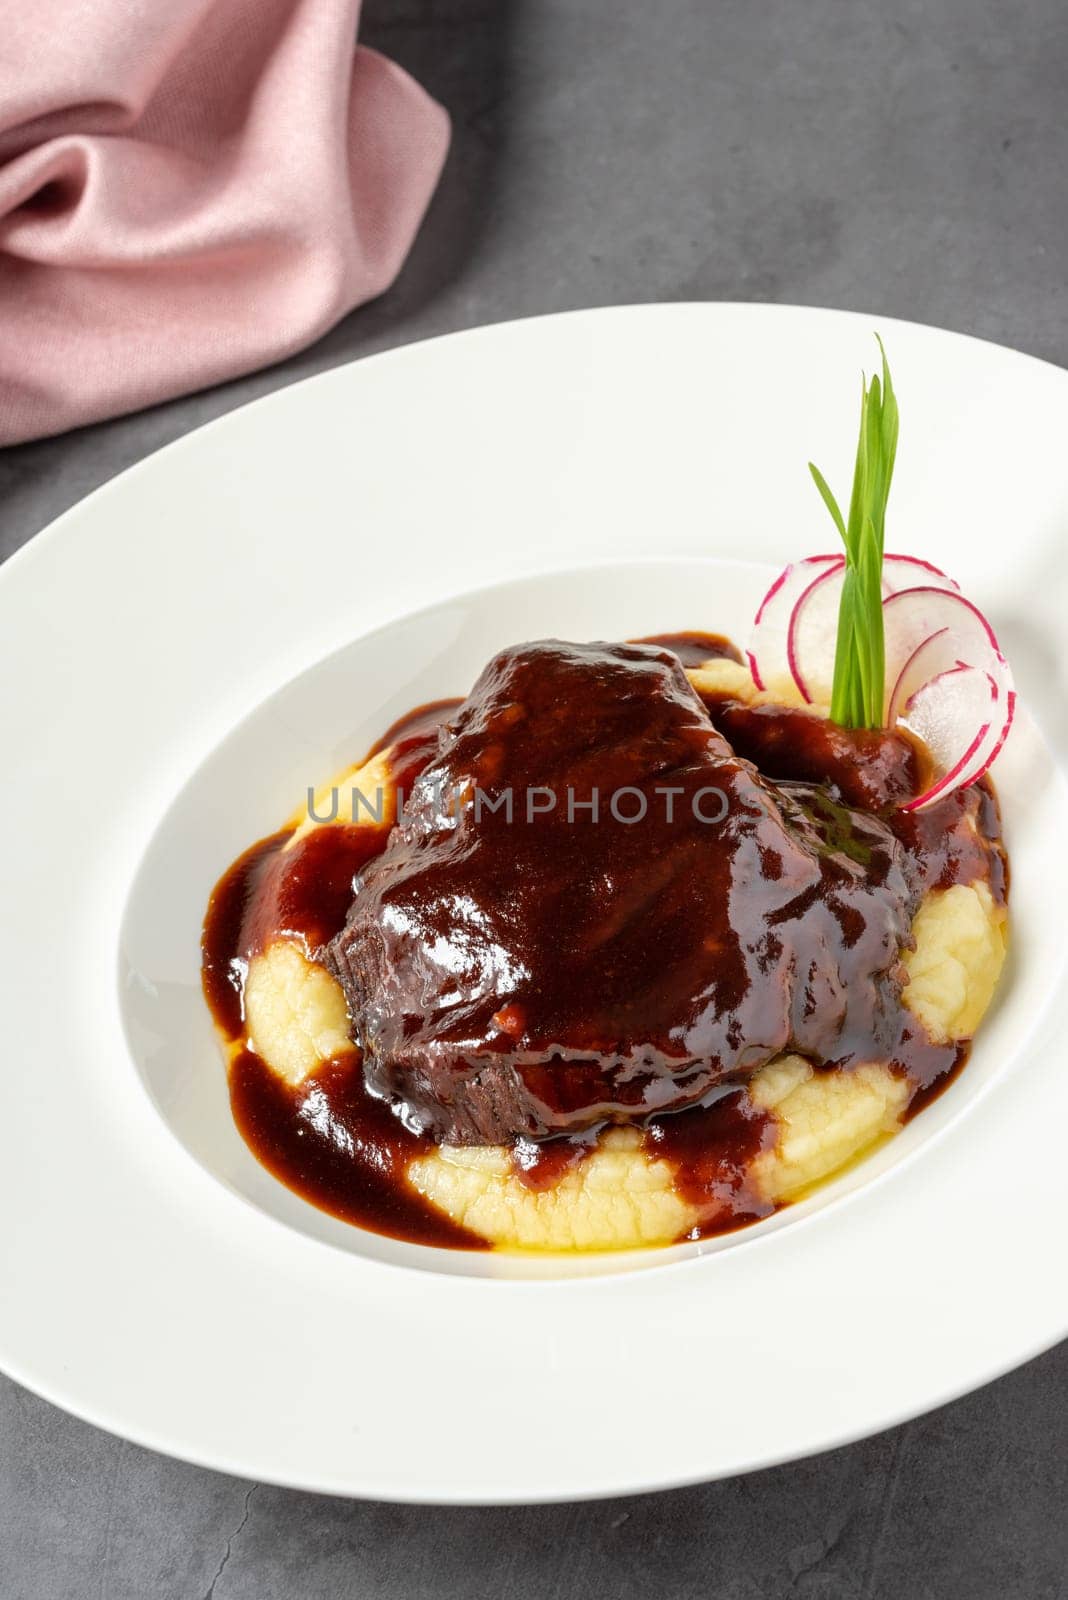 Veal cheek served in a fine dining restaurant